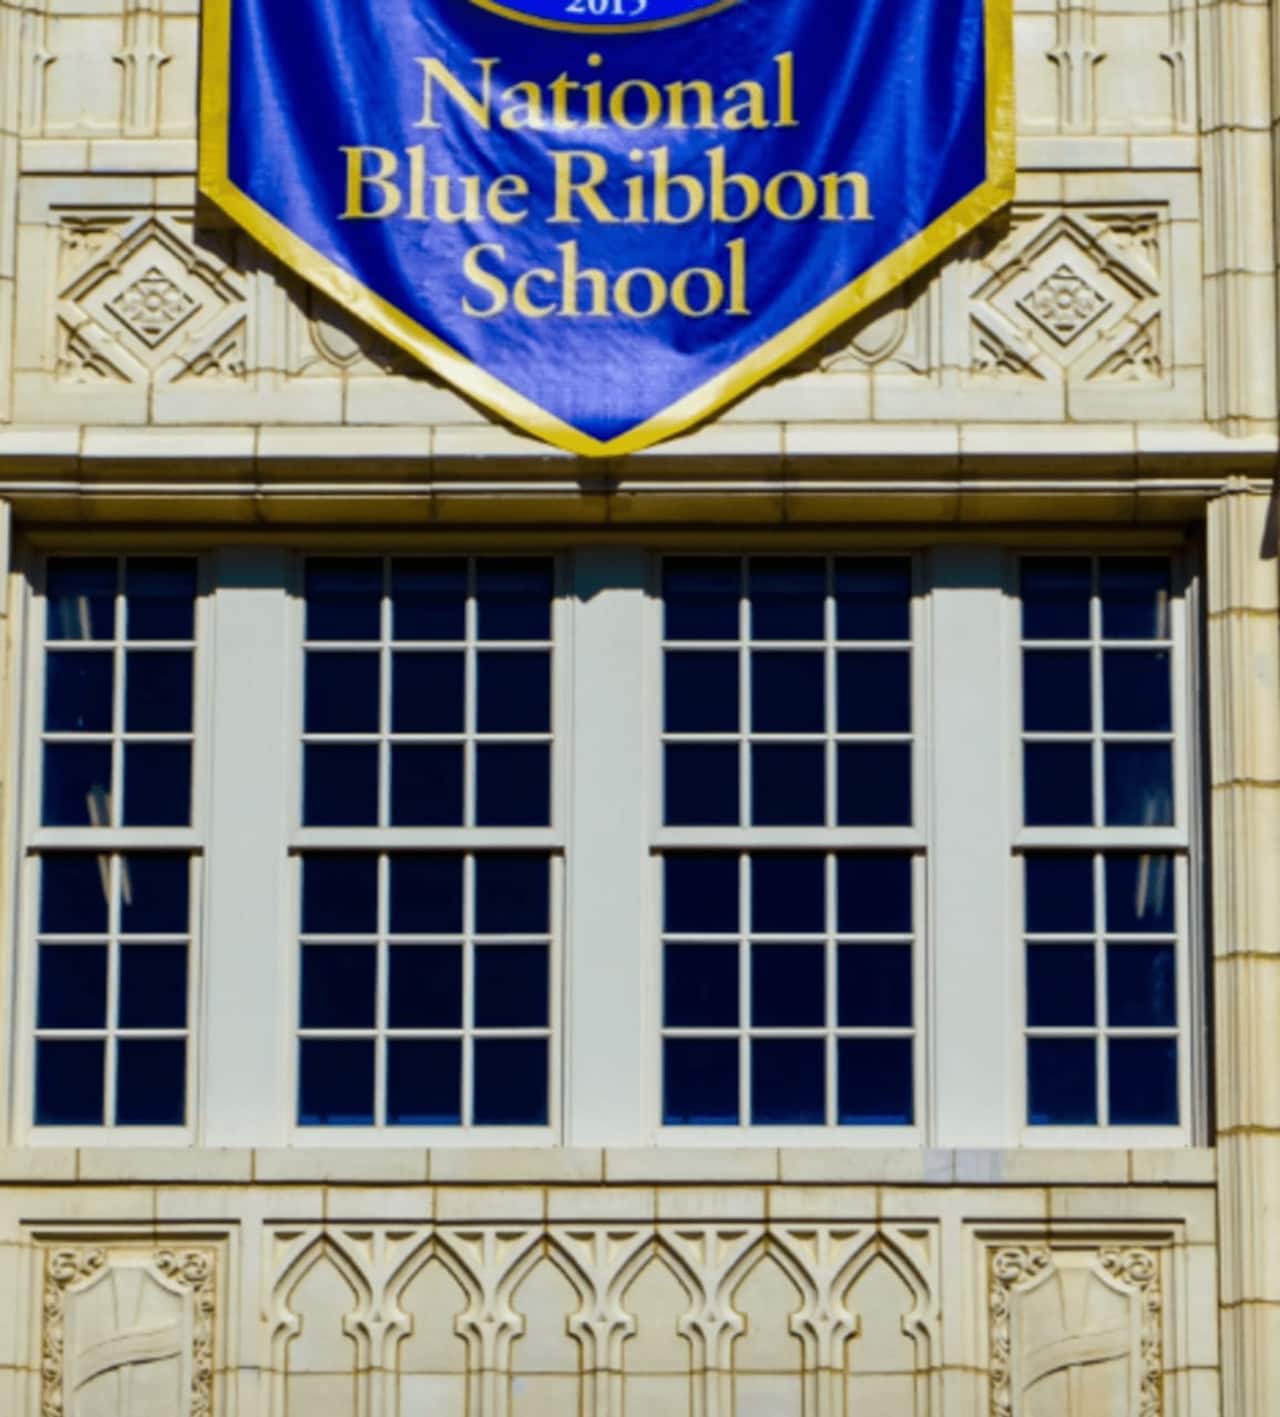 Some Massachusetts schools have been designated as National Blue Ribbon Schools.